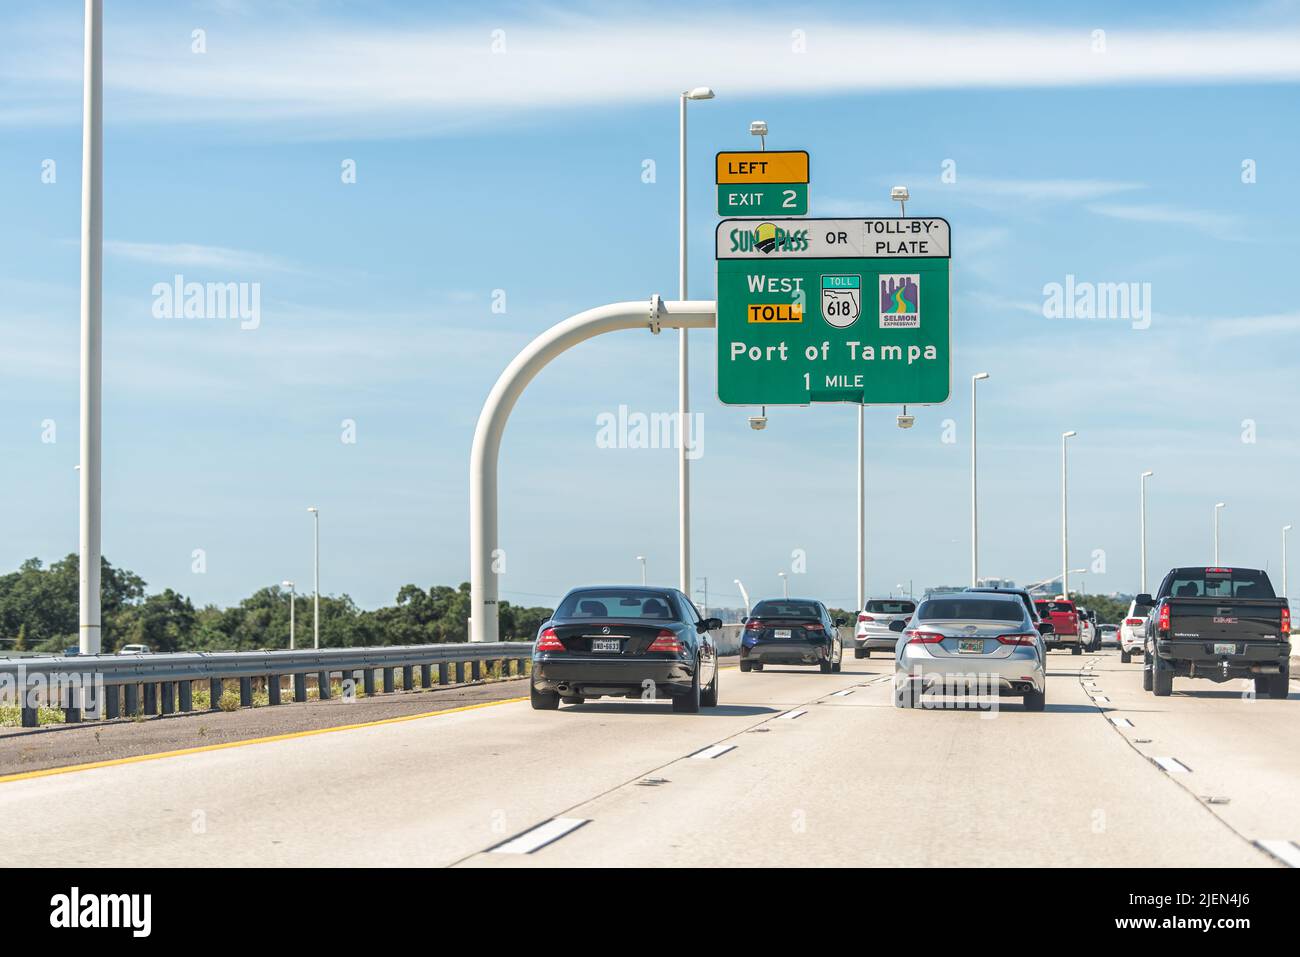 Tampa, USA - October 4, 2021: Road street interstate highway green arrow sign from i75 for Selmon Expressway Sunpass toll exit to Port of Tampa Florid Stock Photo